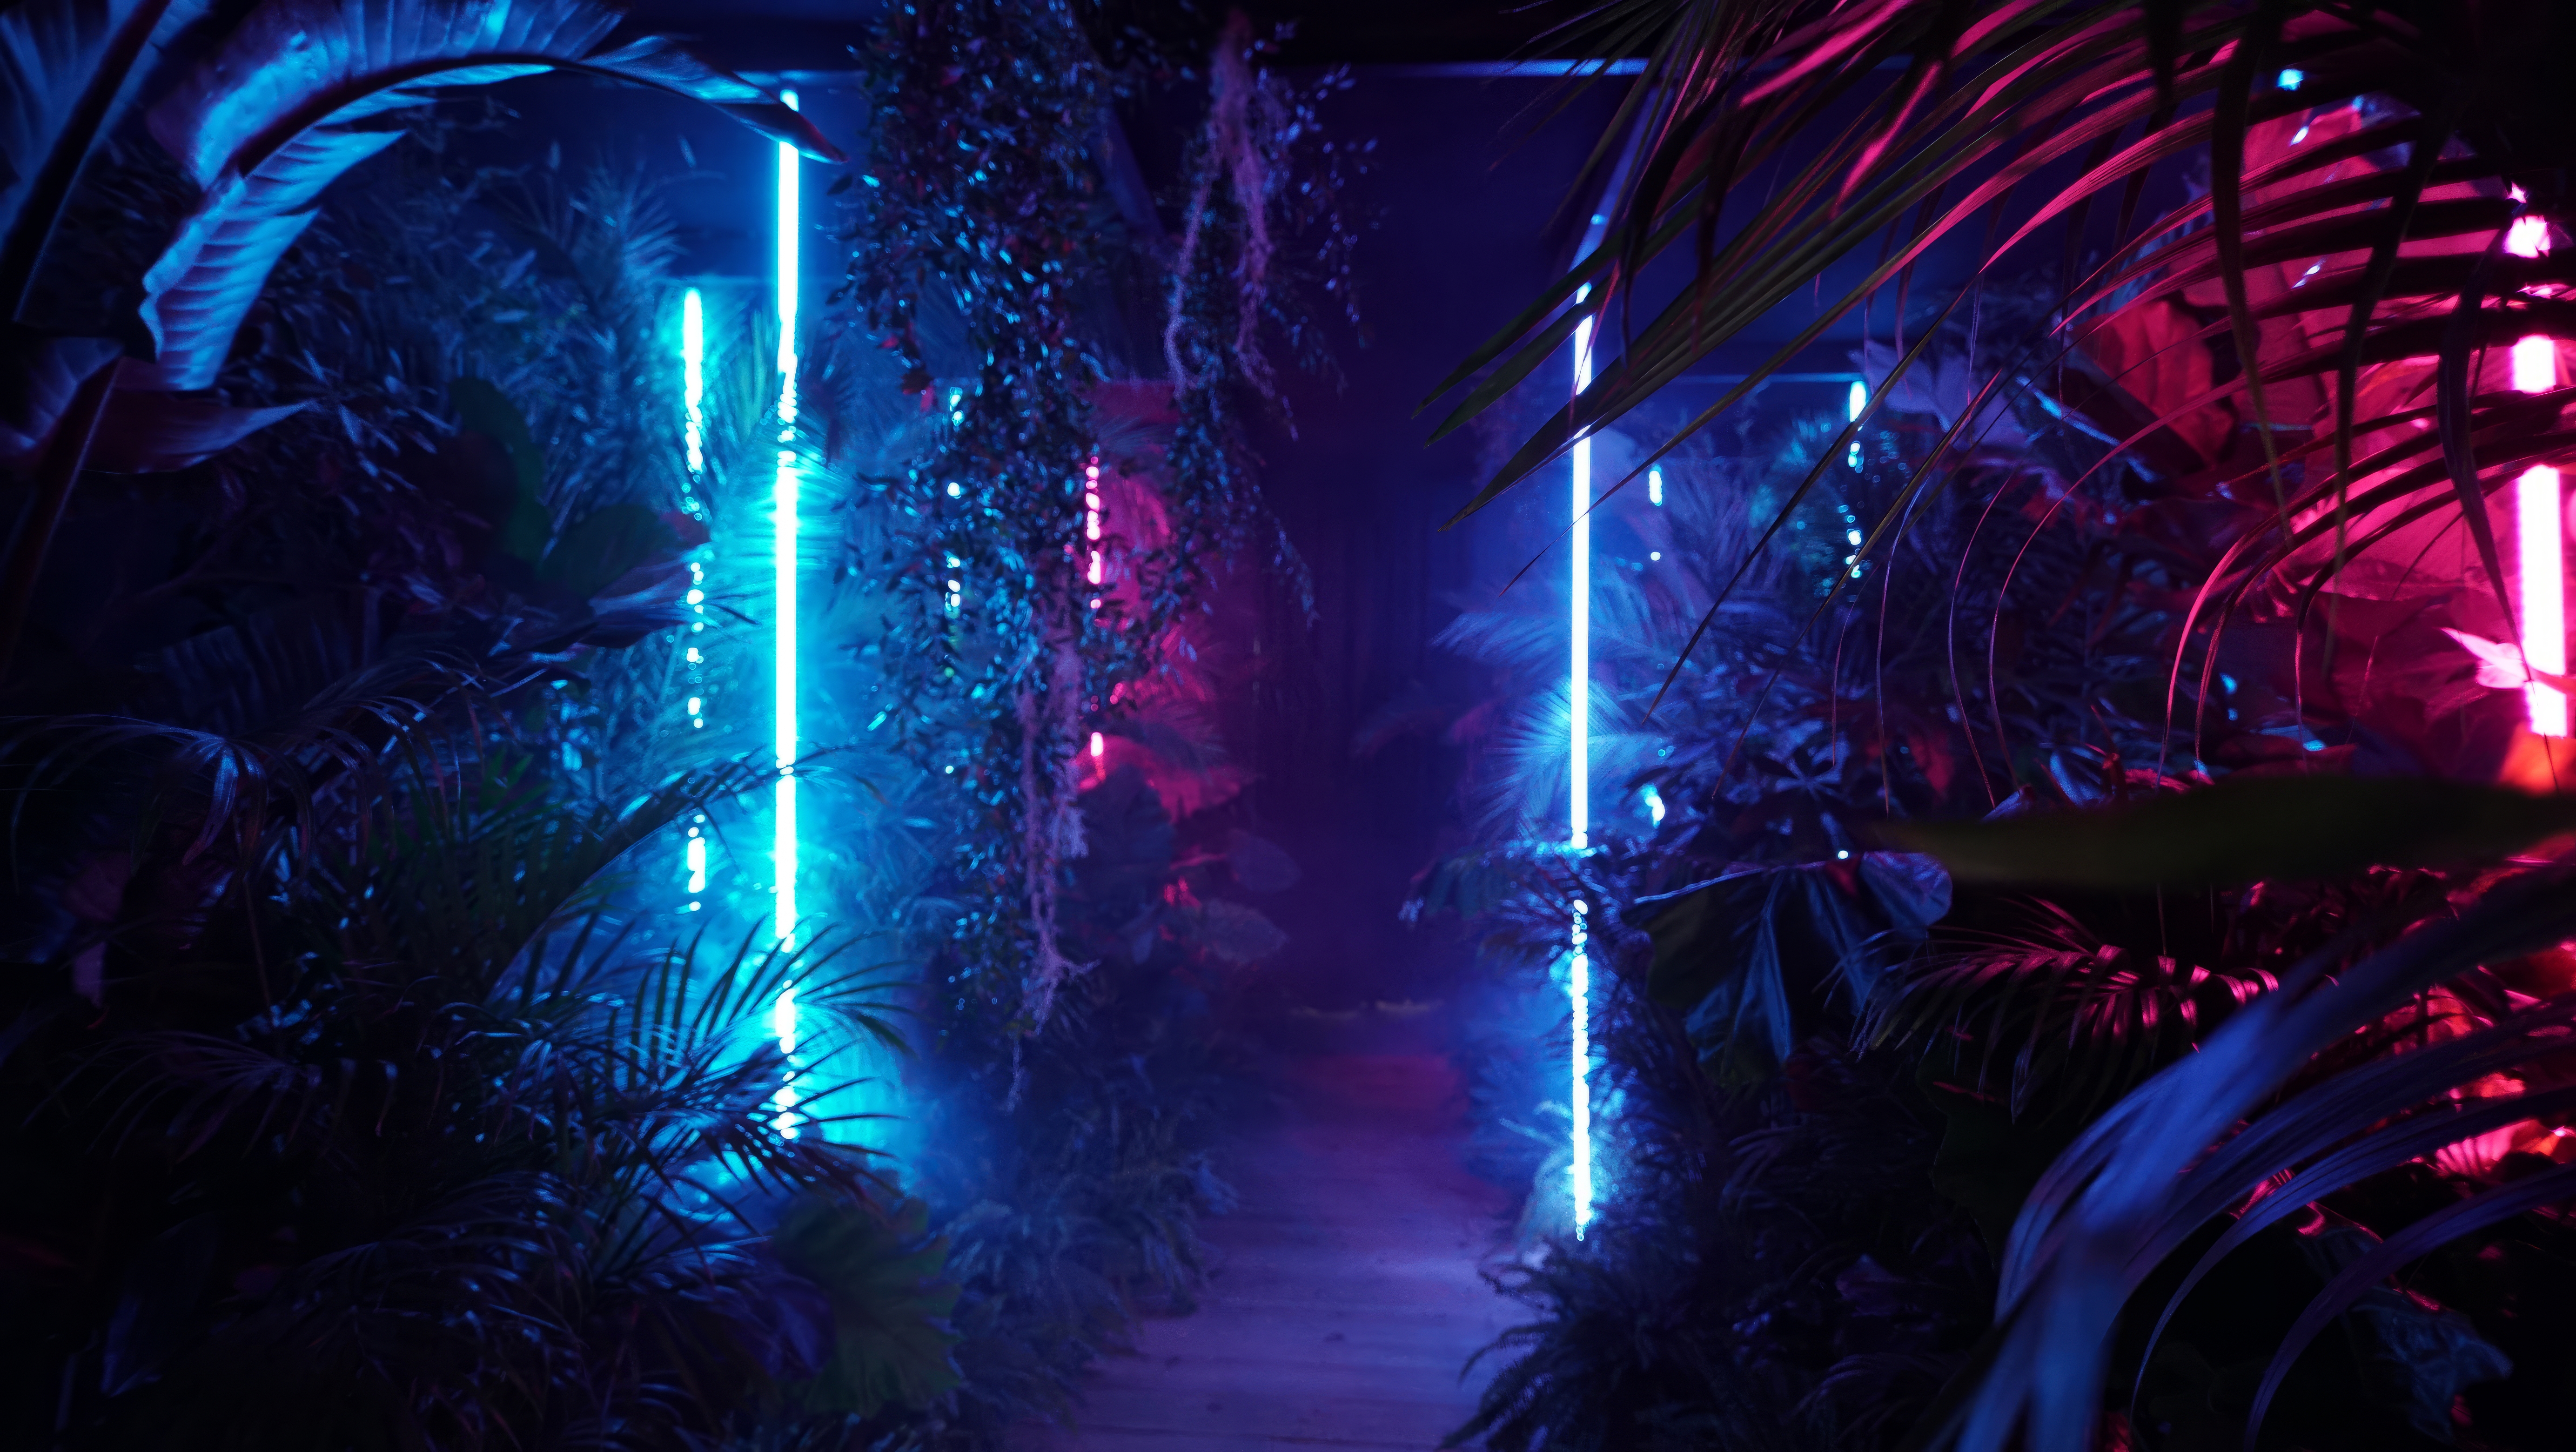 General 5536x3120 plants ferns exotic neon lights blue pink glowing low light